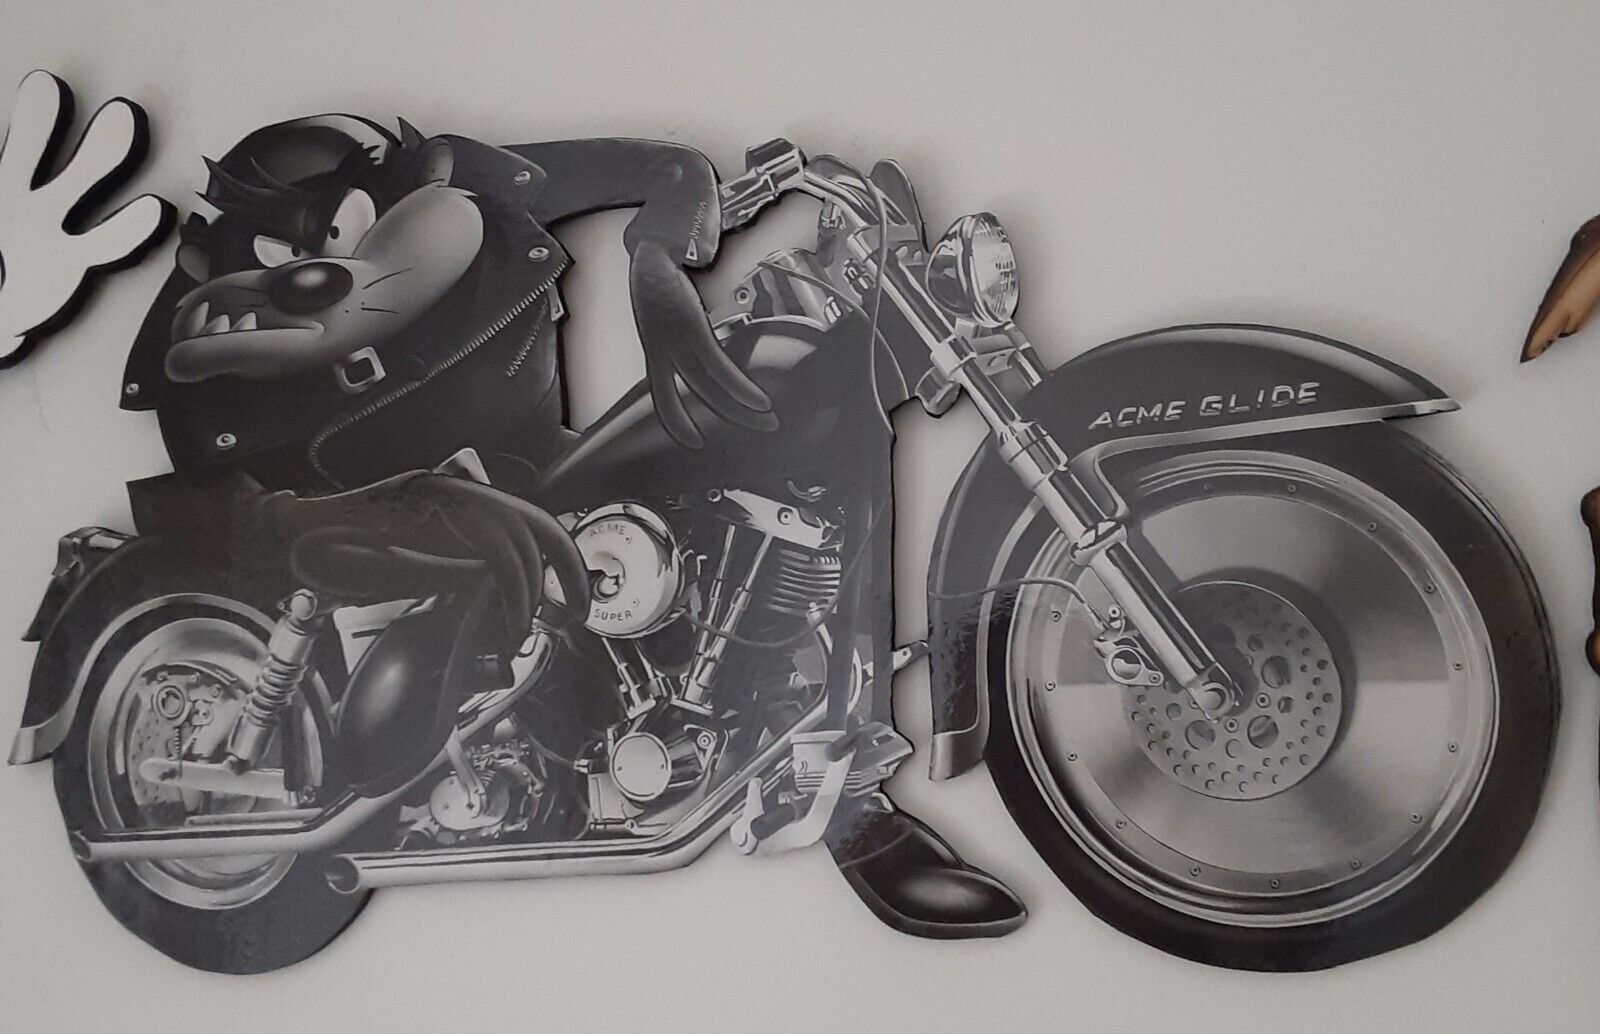 NEW Taz Motorcycle Cut out Wall Plaque Warner Bro Collectible